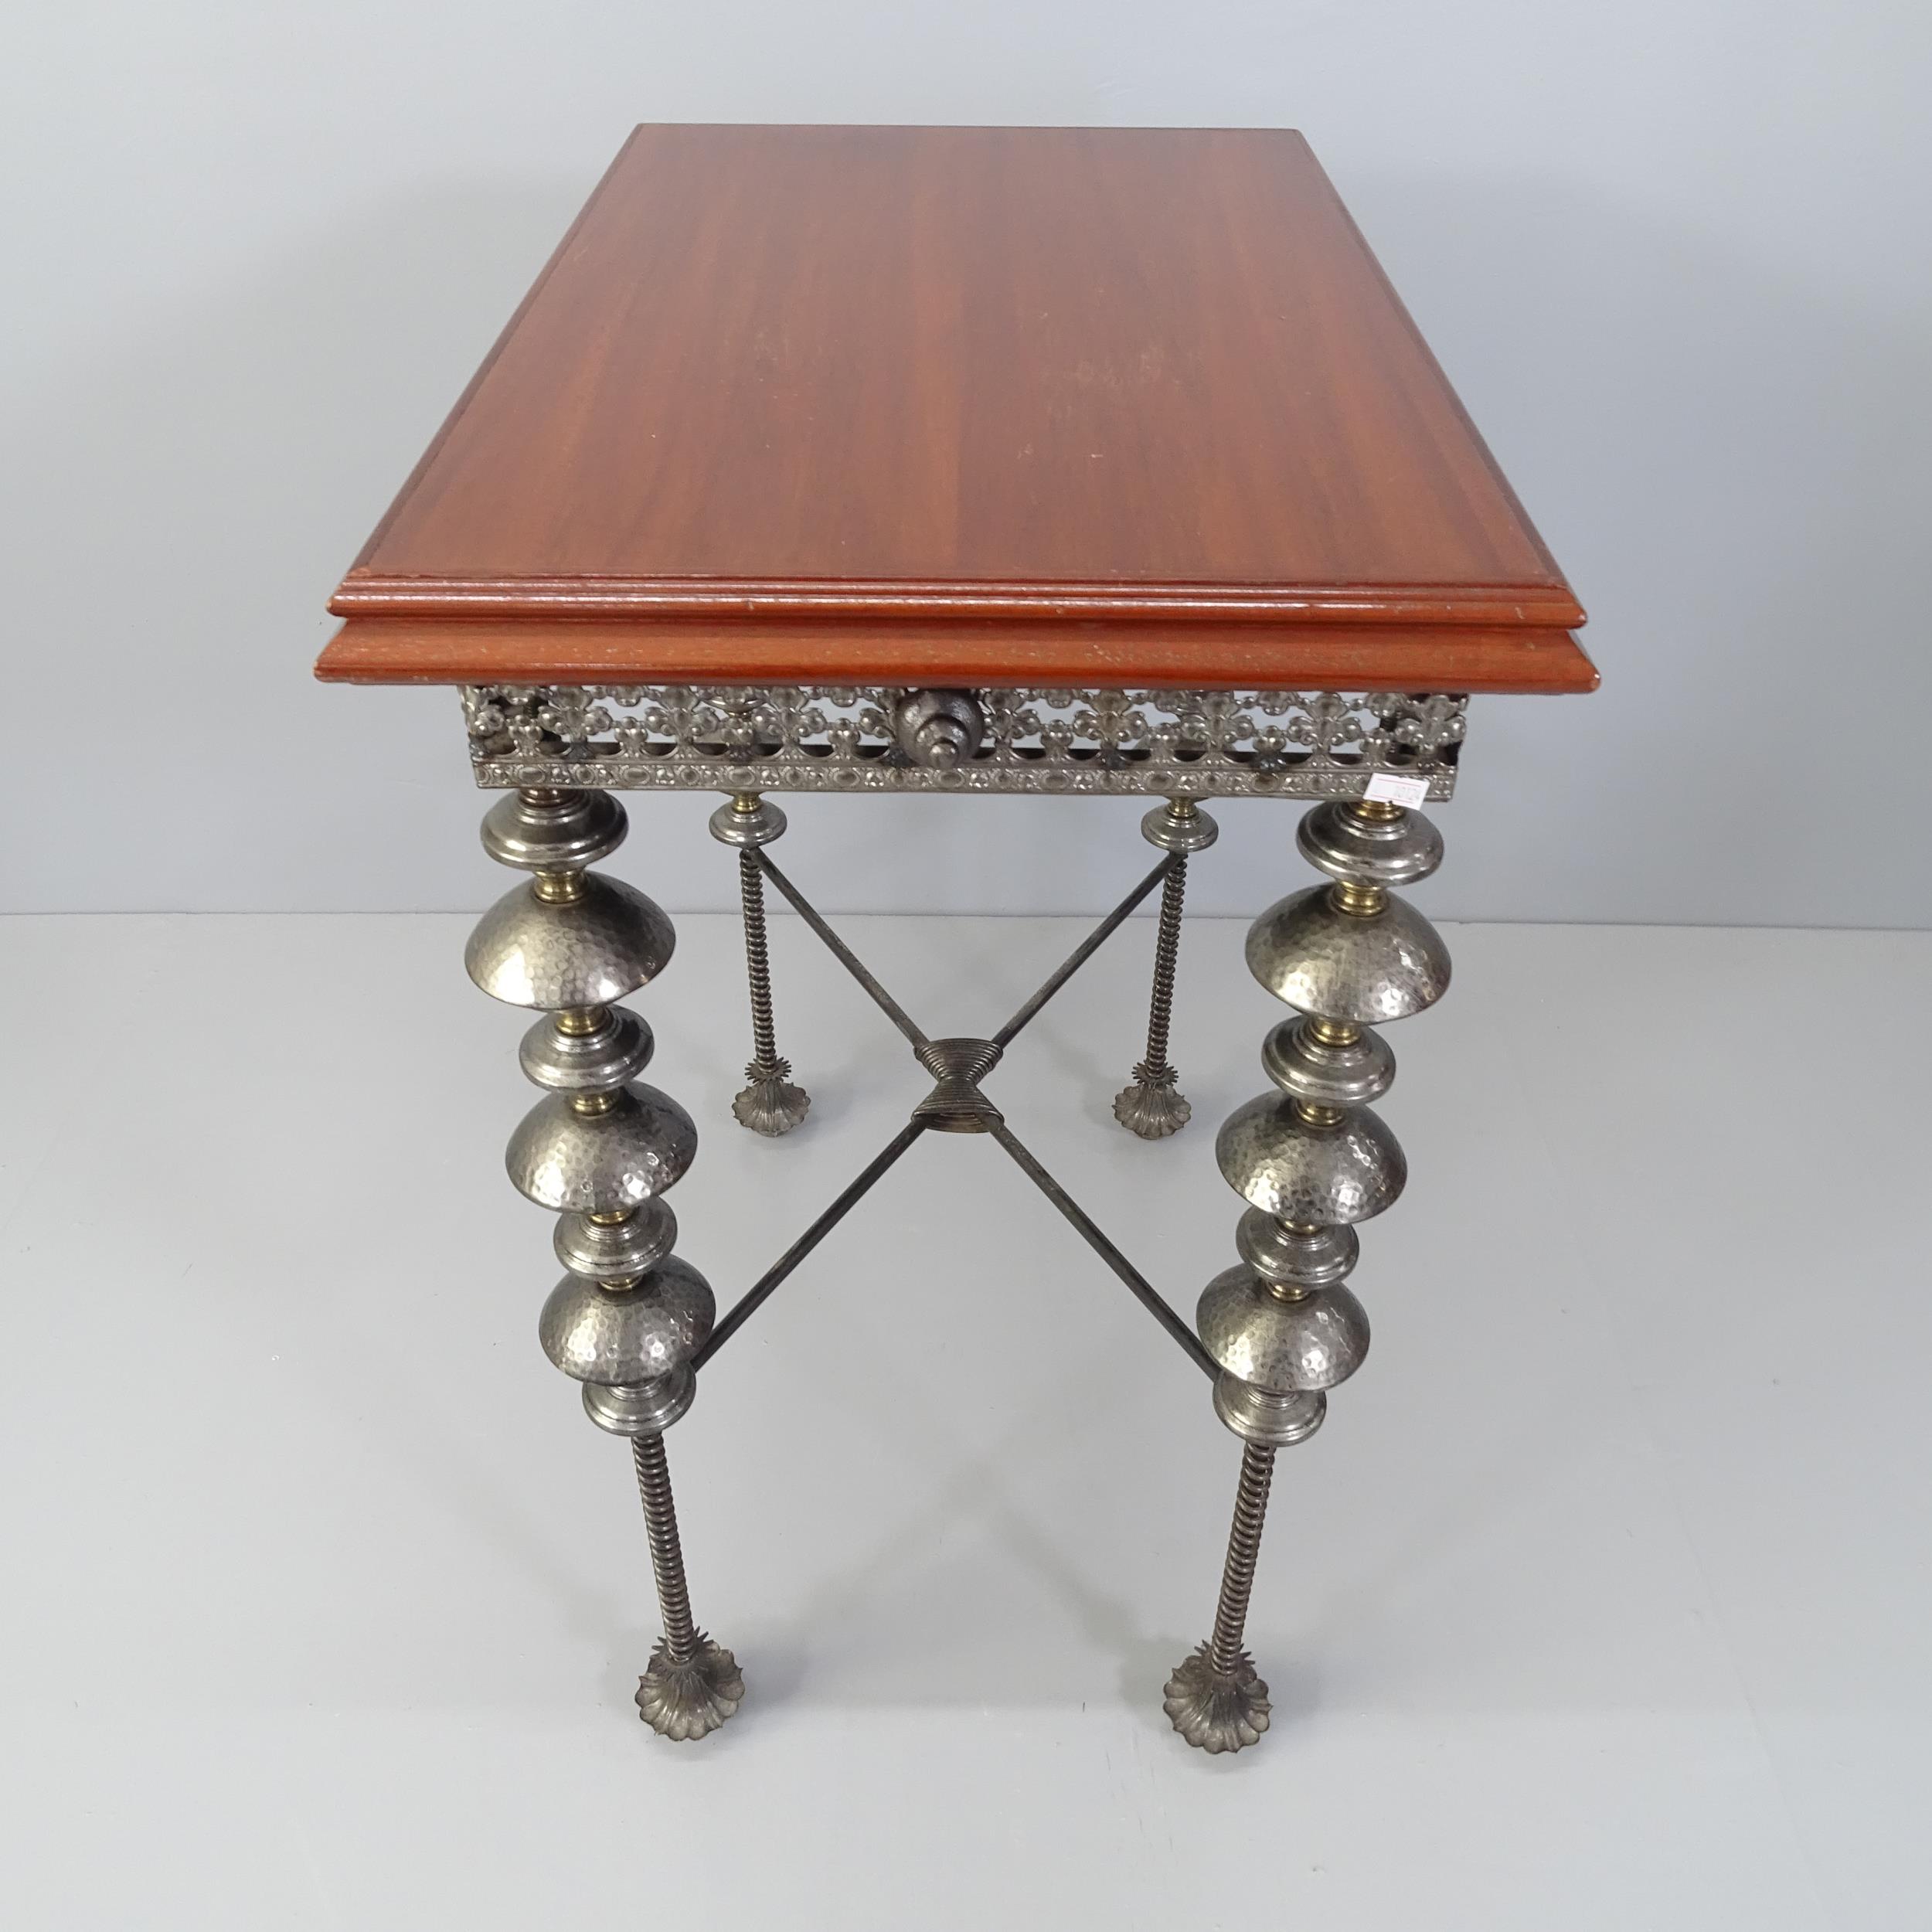 An unusual design side or lamp table, with the mahogany top on ornate base with beaten metal - Image 2 of 2